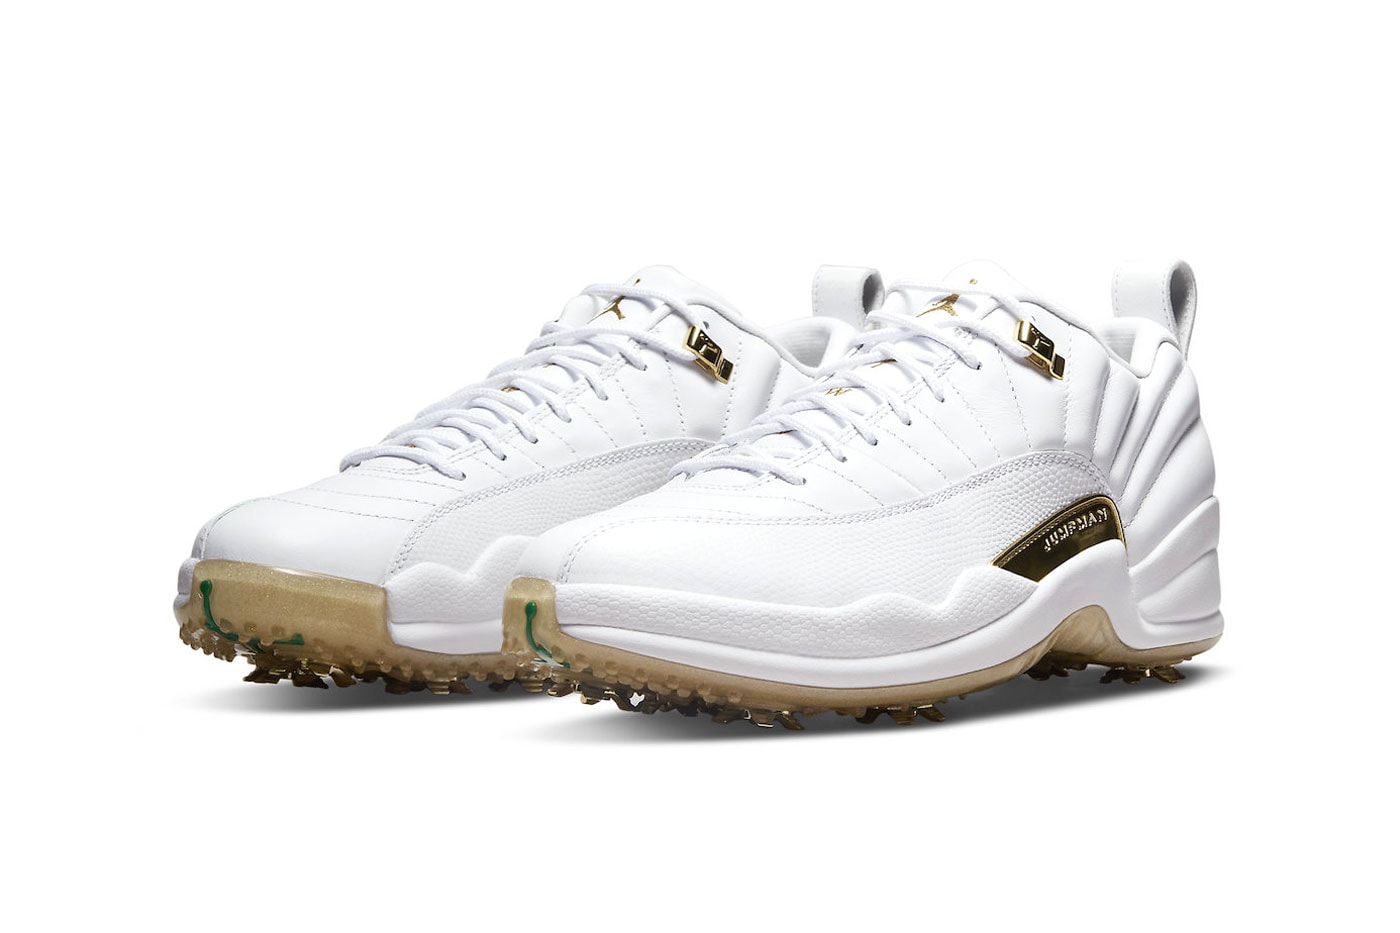 Air Jordan 12 Low Golf Masters Tournament Metallic Gold green soft spikes white leather gum release info date price